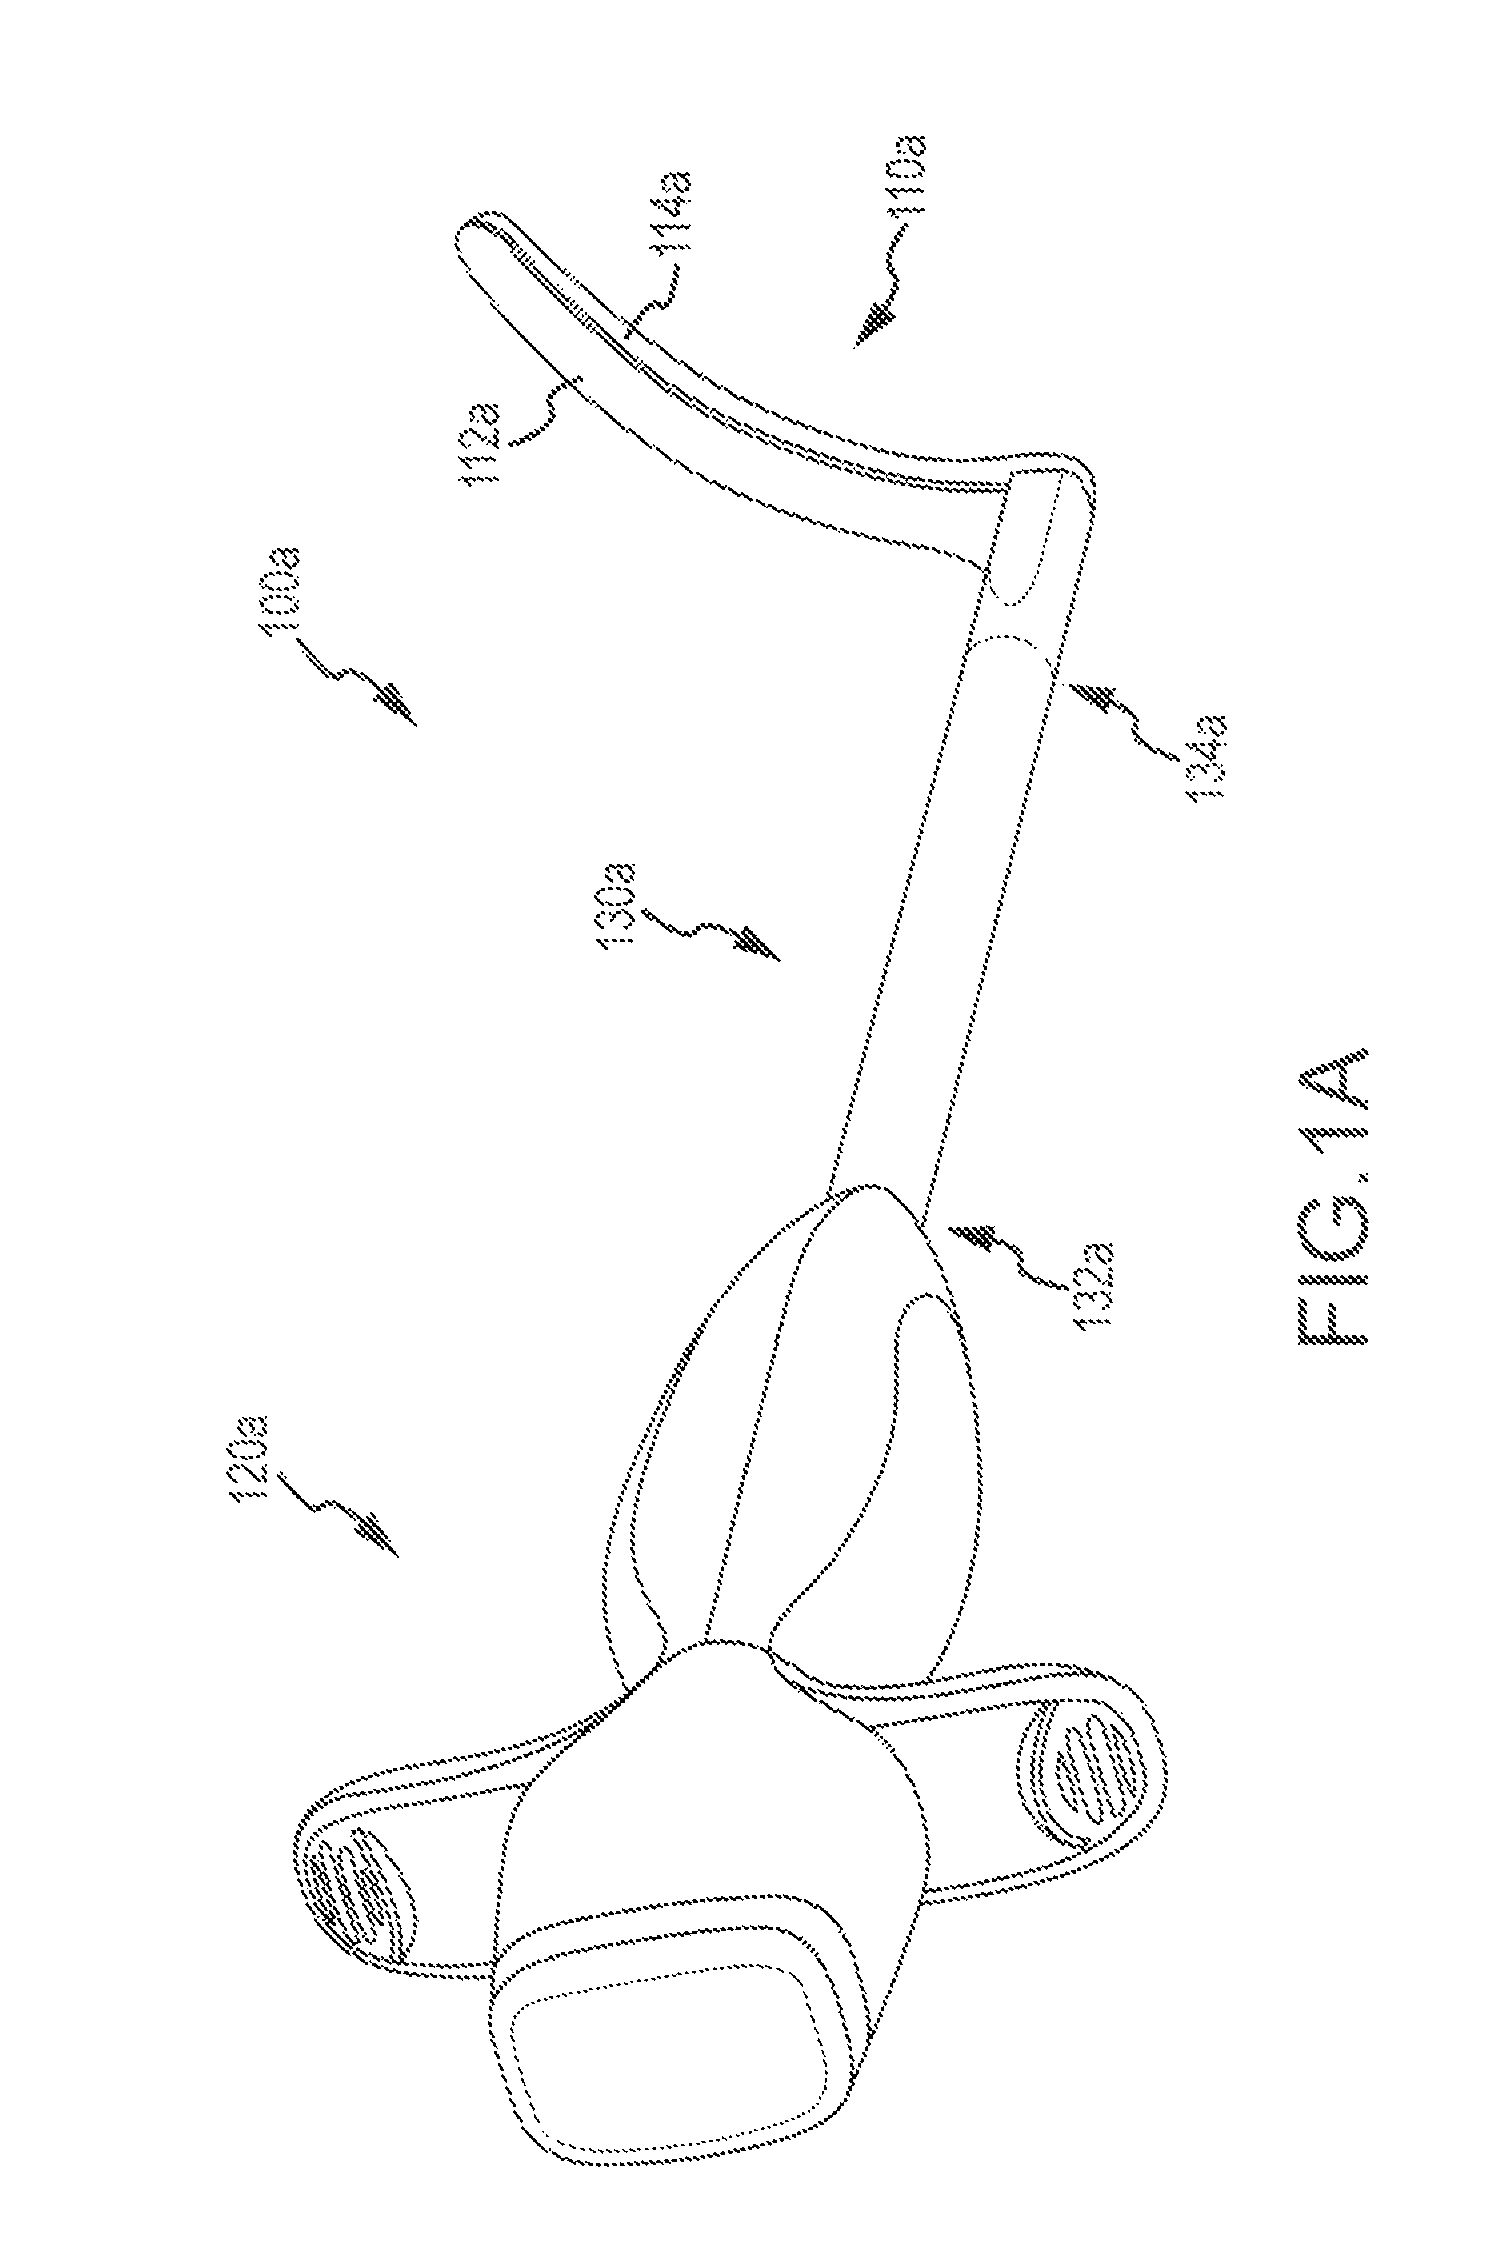 High-voltage pulse ablation systems and methods